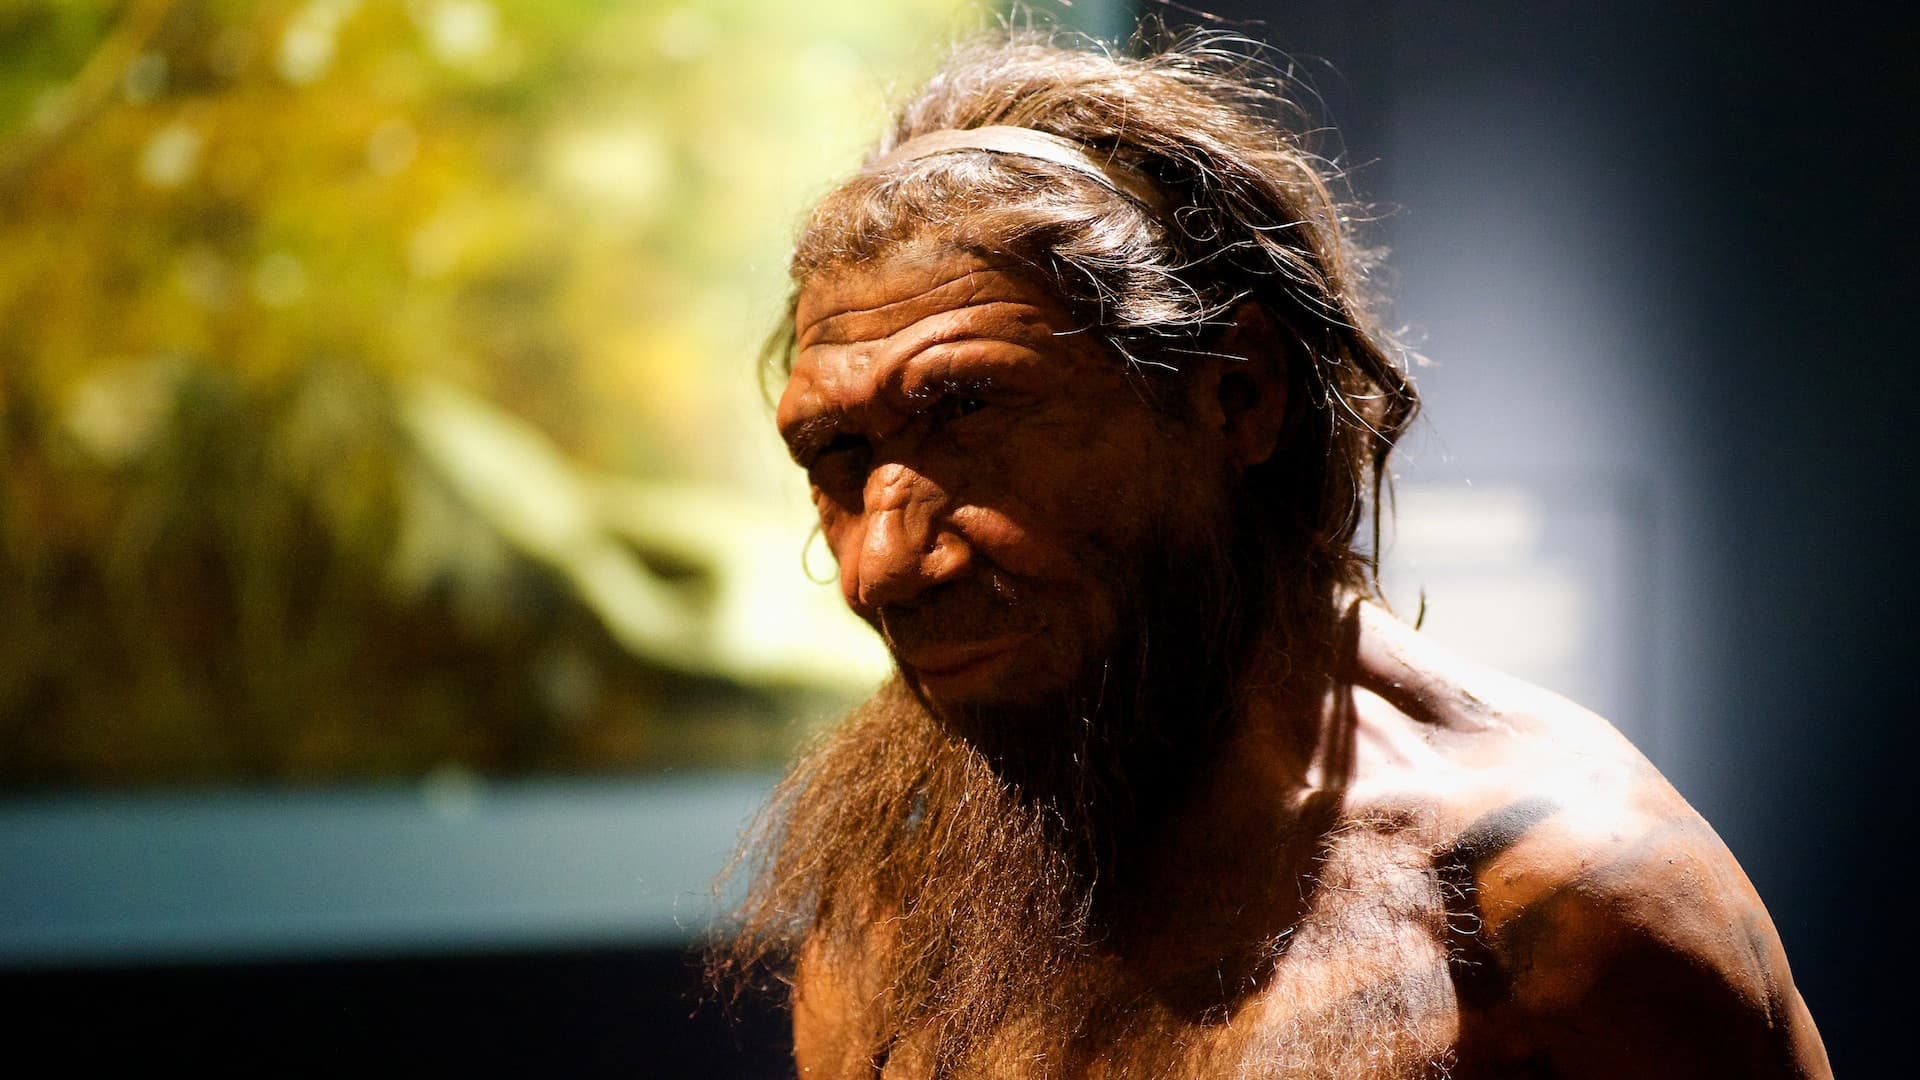 Reconstruction of a hairy Neanderthal man